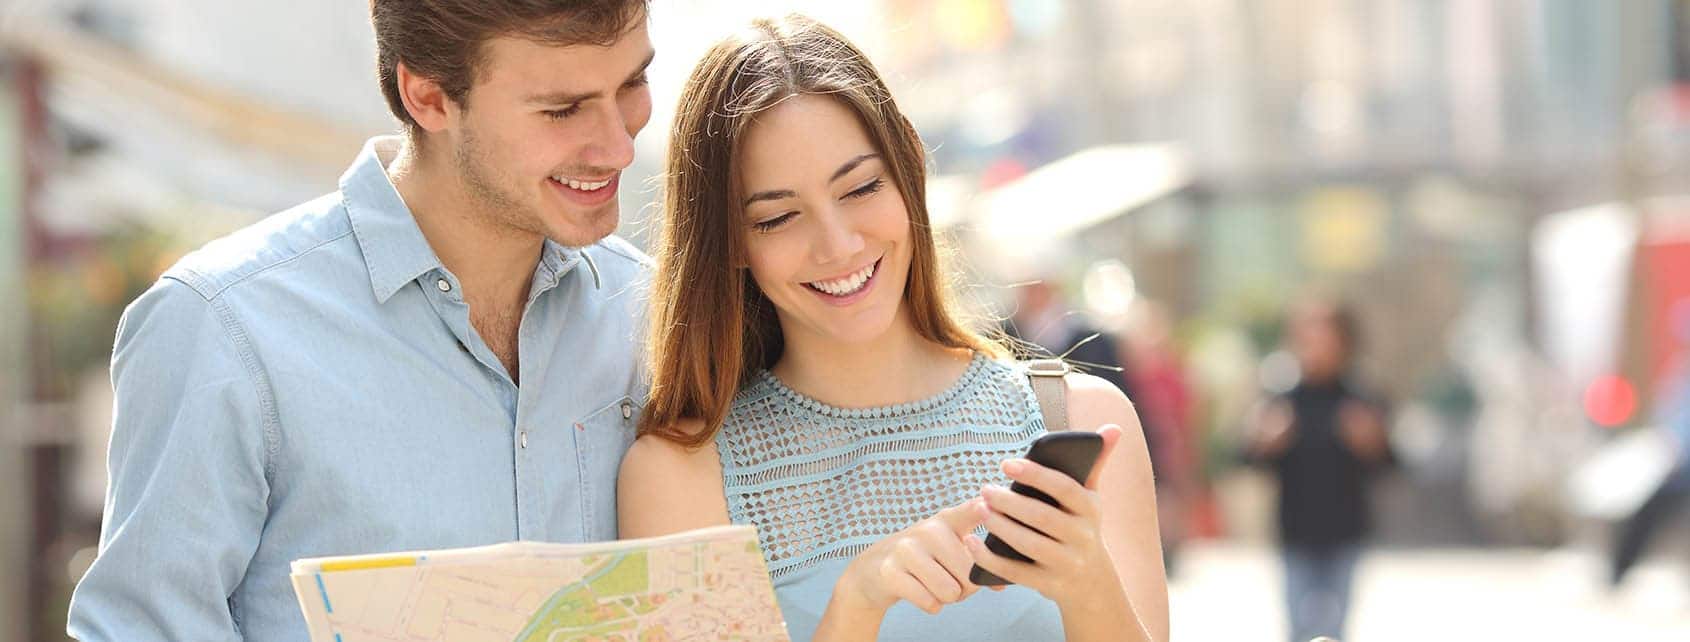 Tourists with smartphone and map: